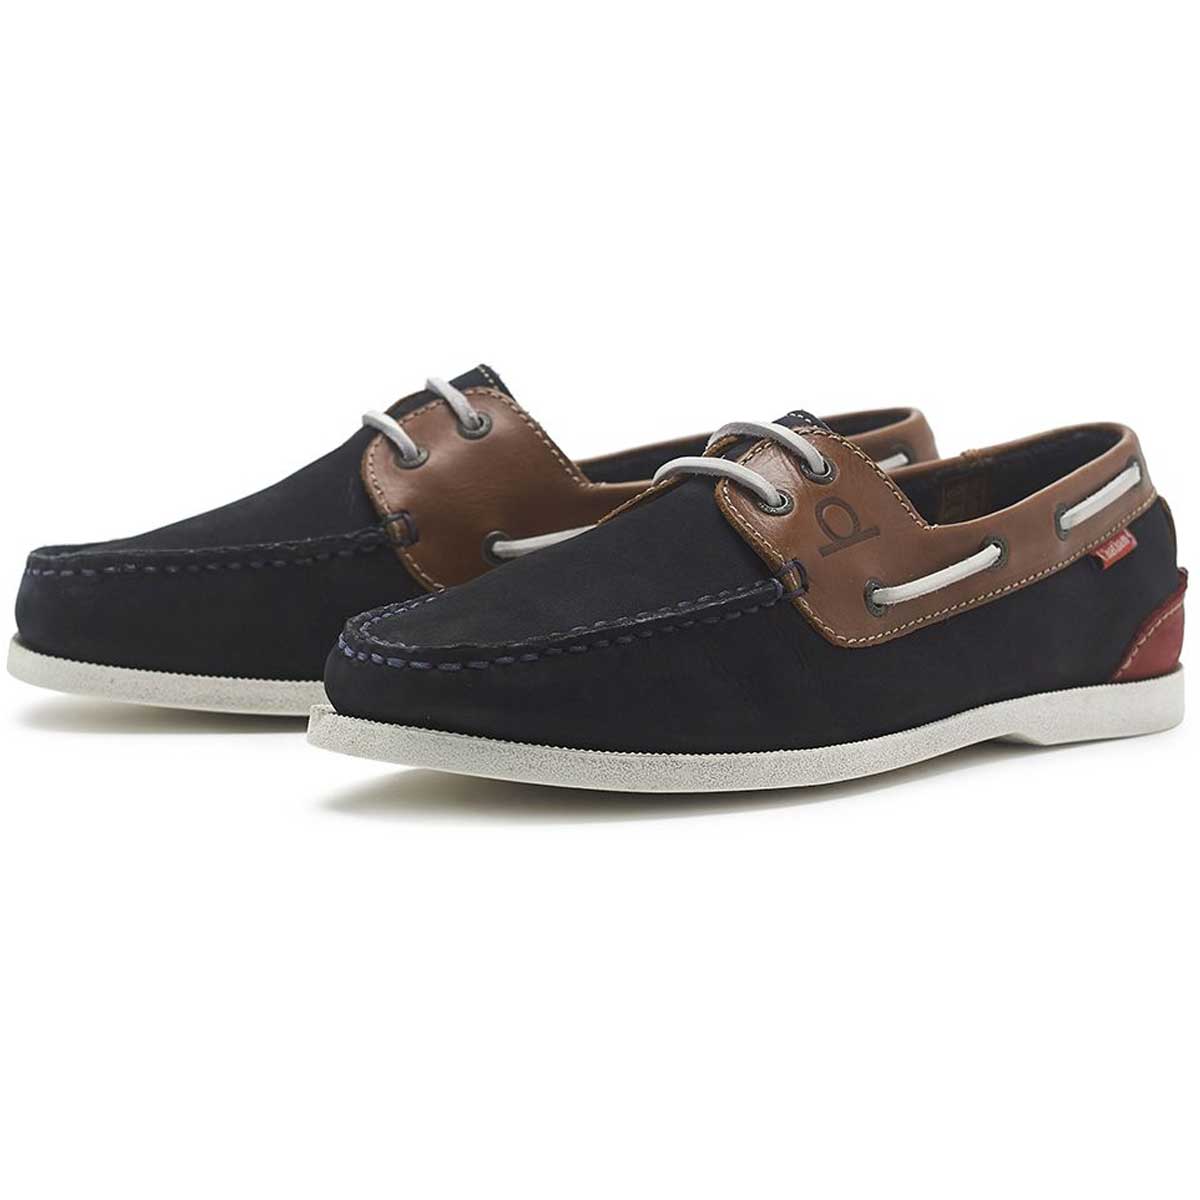 CHATHAM Galley II Leather Boat Shoes - Men's - Navy / Tan